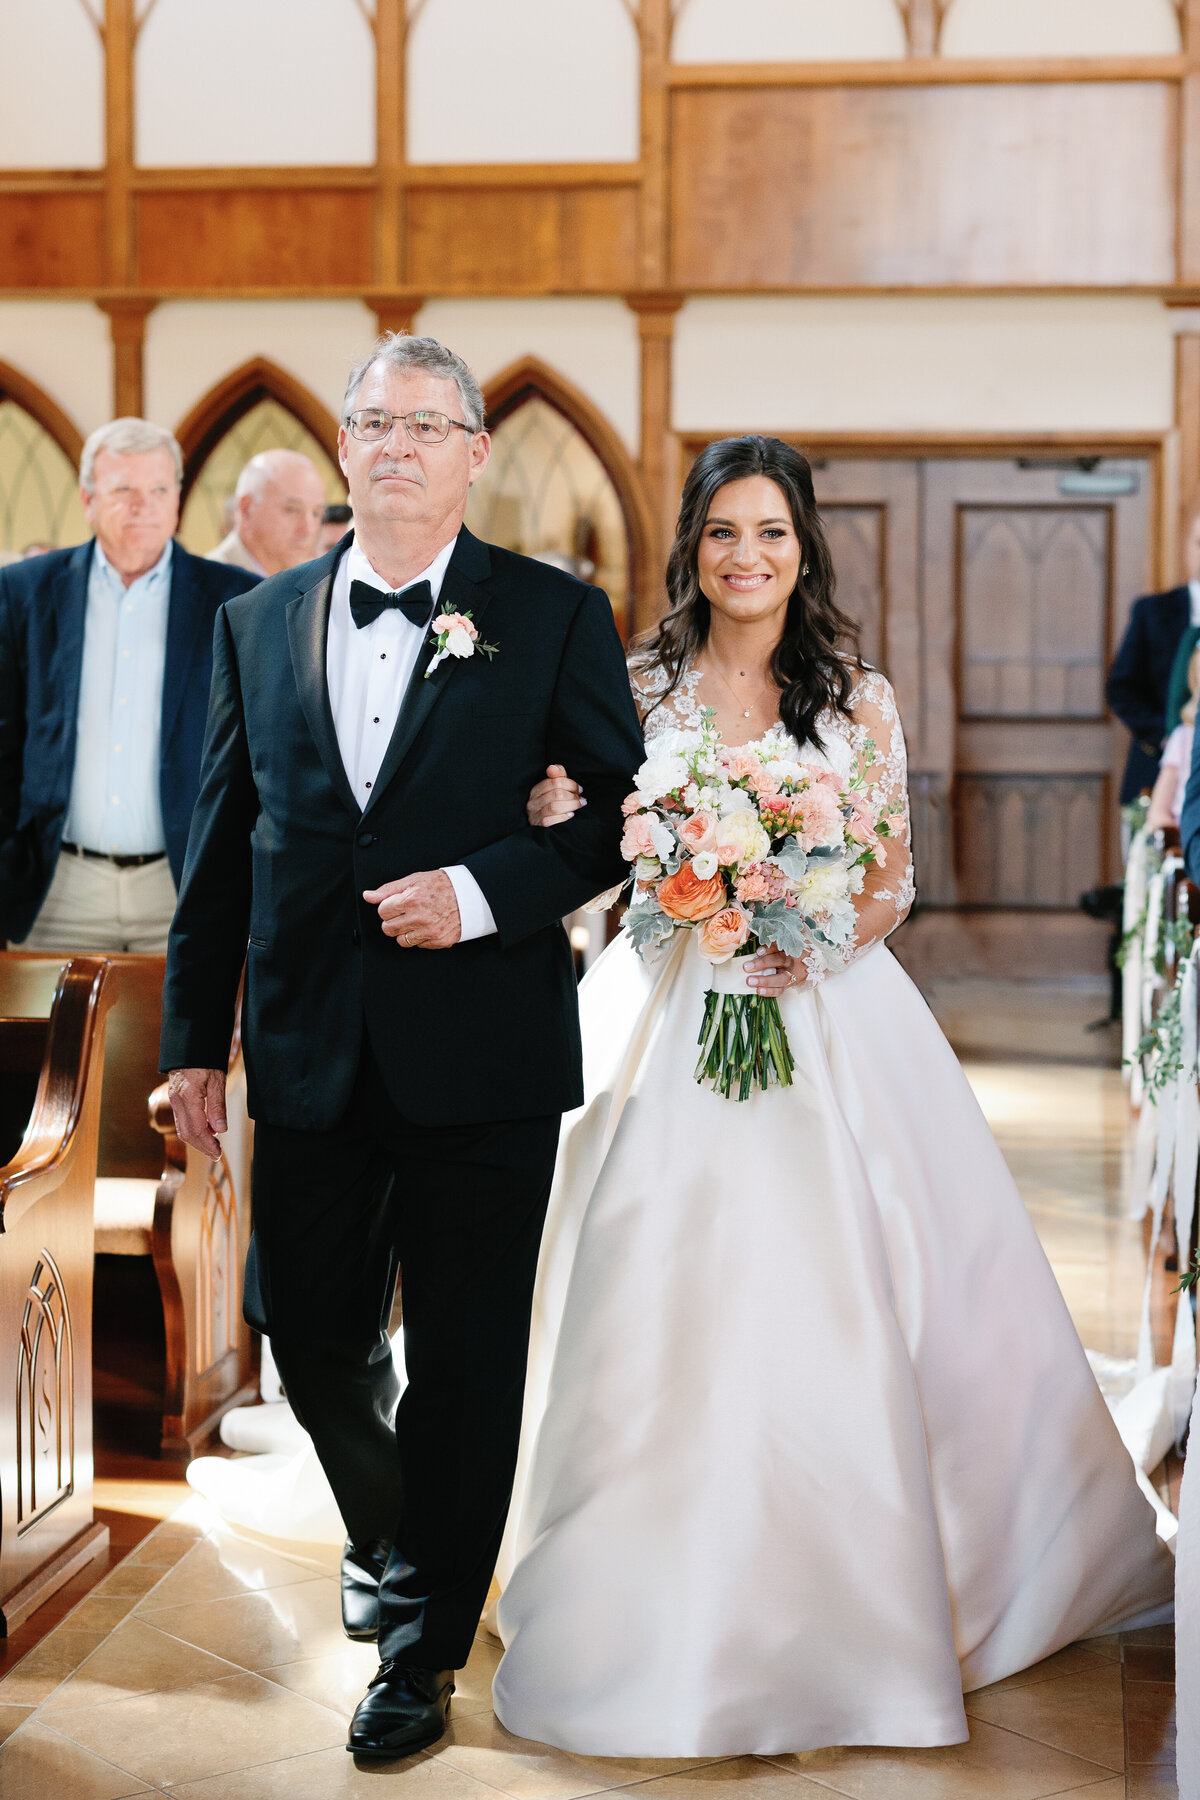 Ellen and Austin - Lee Chapel and Black Fox Farms - Ceremony- East Tennessee Photographer - Alaina René Photography-99